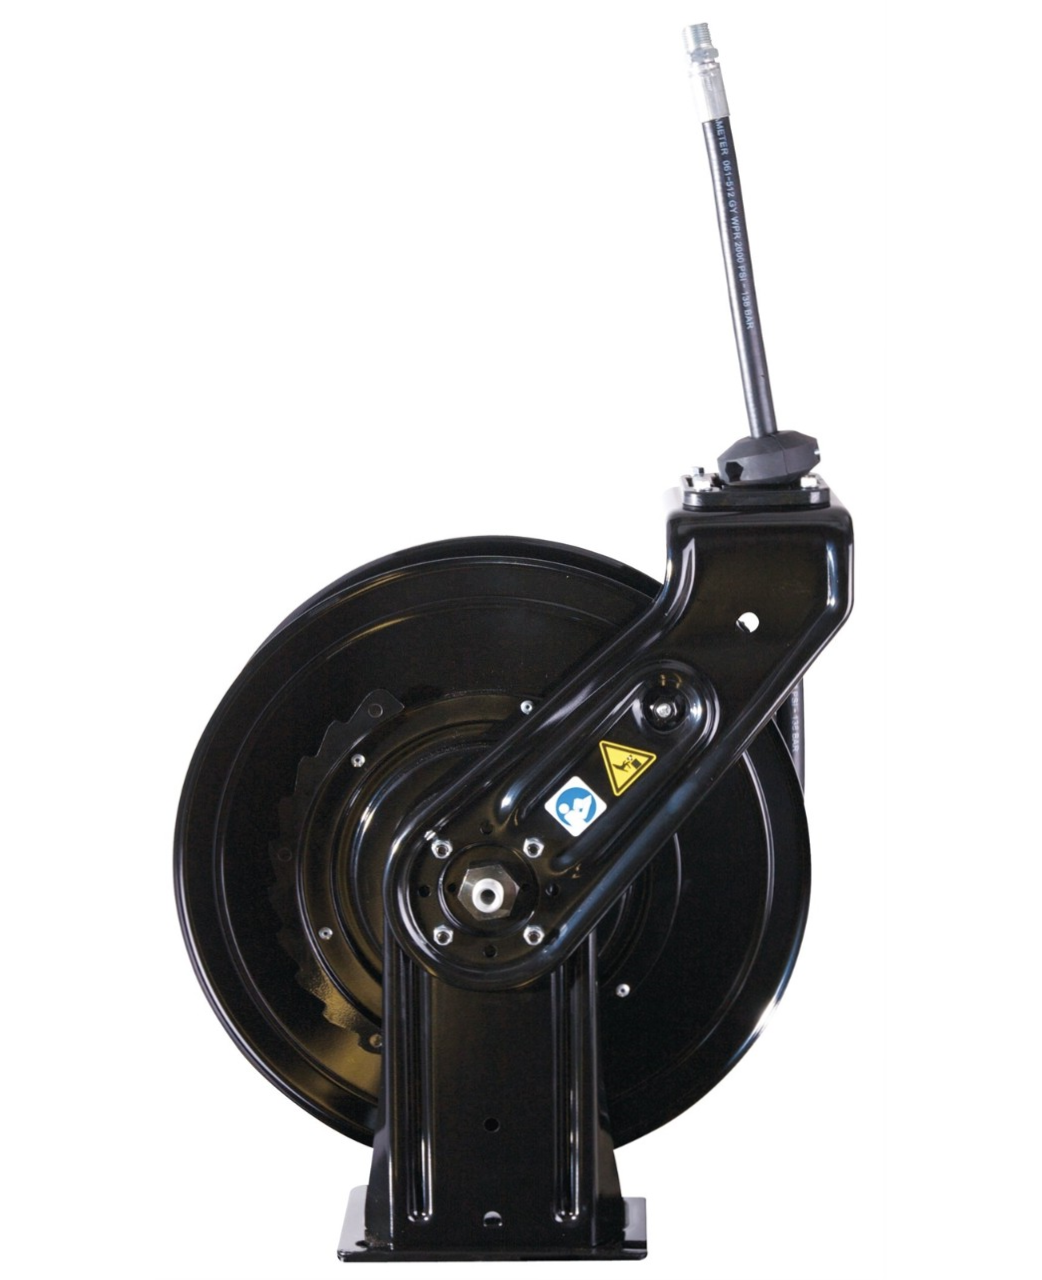 Graco SD20 Series Hose Reel w/ 3/8 in. X 65 ft. Hose - Air/Water - Black (Truck/Bench Mount)